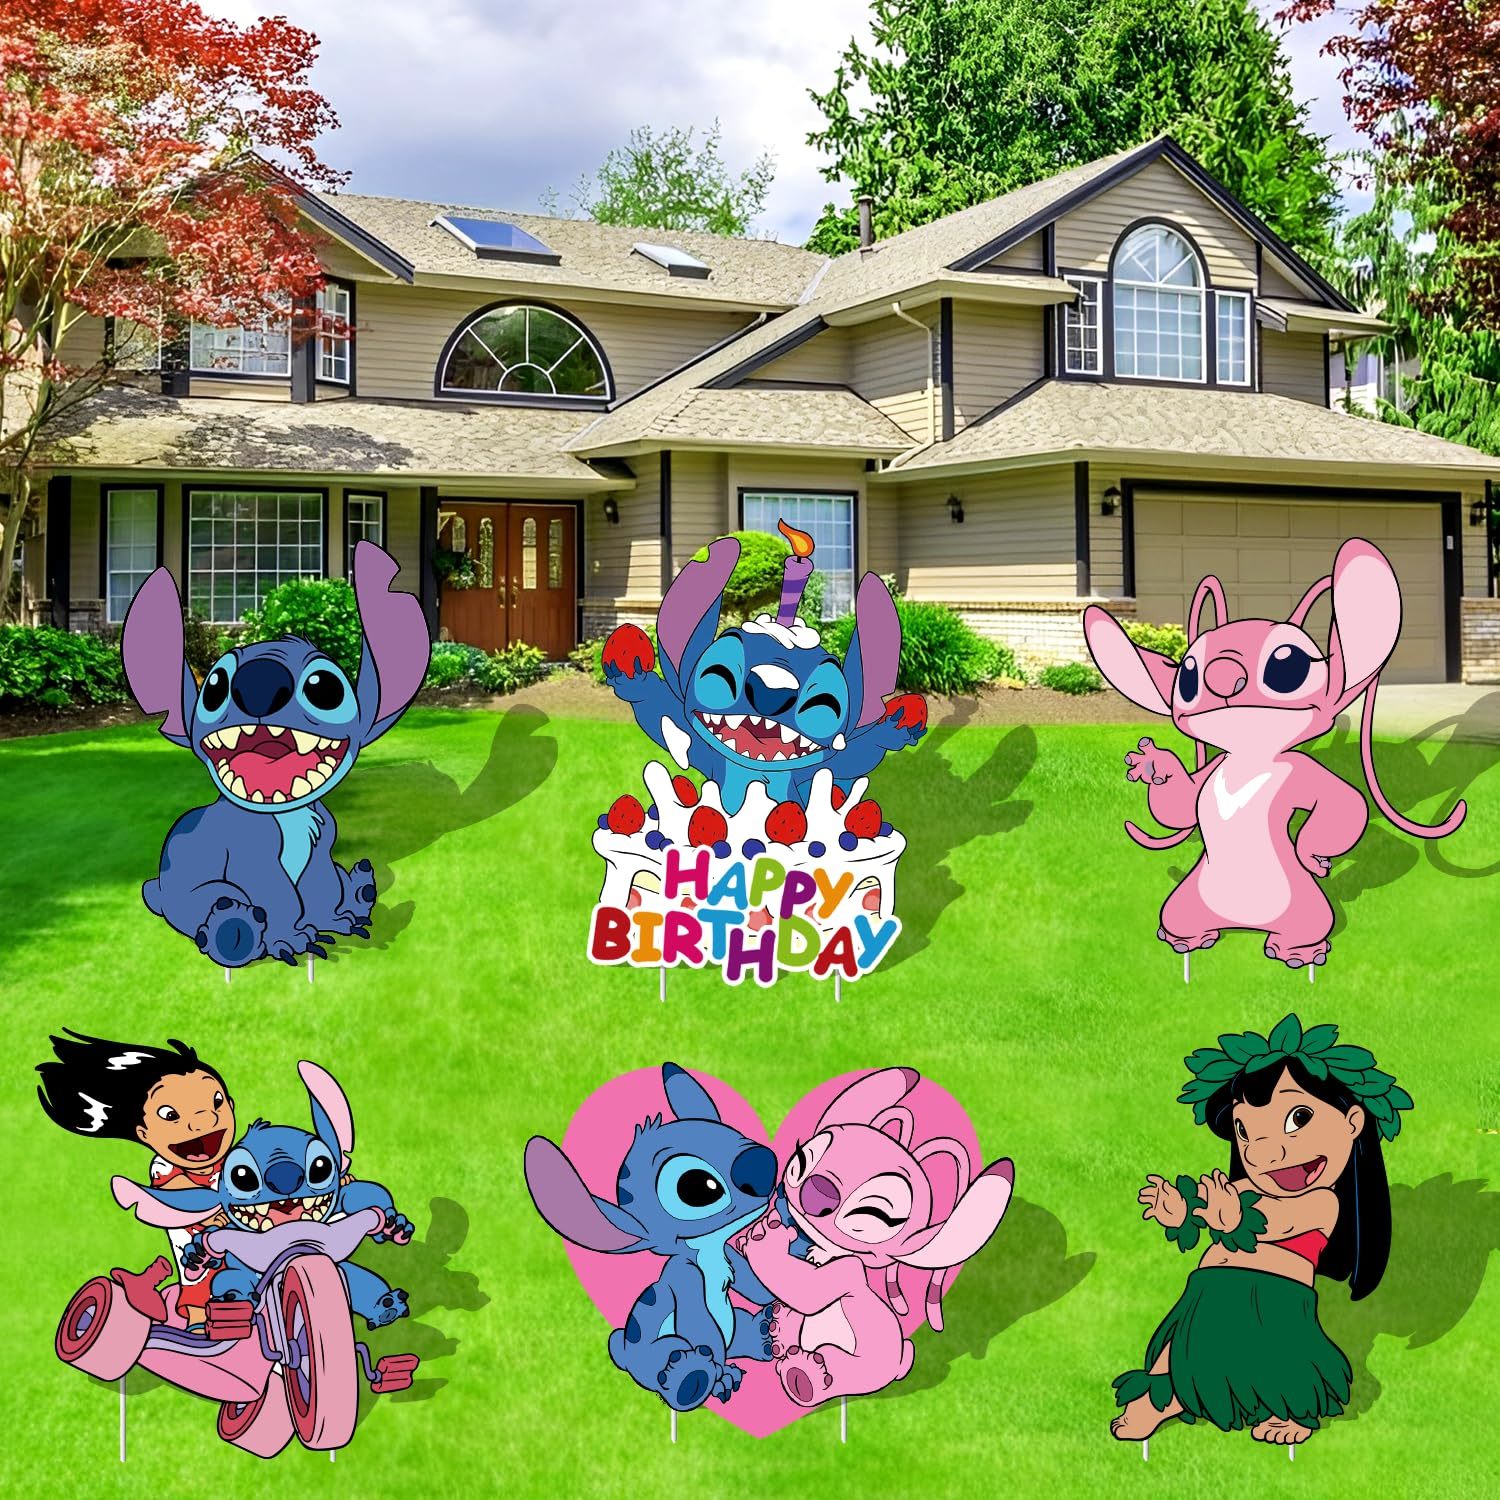 Stitch Birthday Party Supplies, Lilo and Stitch Party Decorations Include  Happy Birthday Banner, Backdrop, Tableware Set, Tablecloth, Hanging Swirls